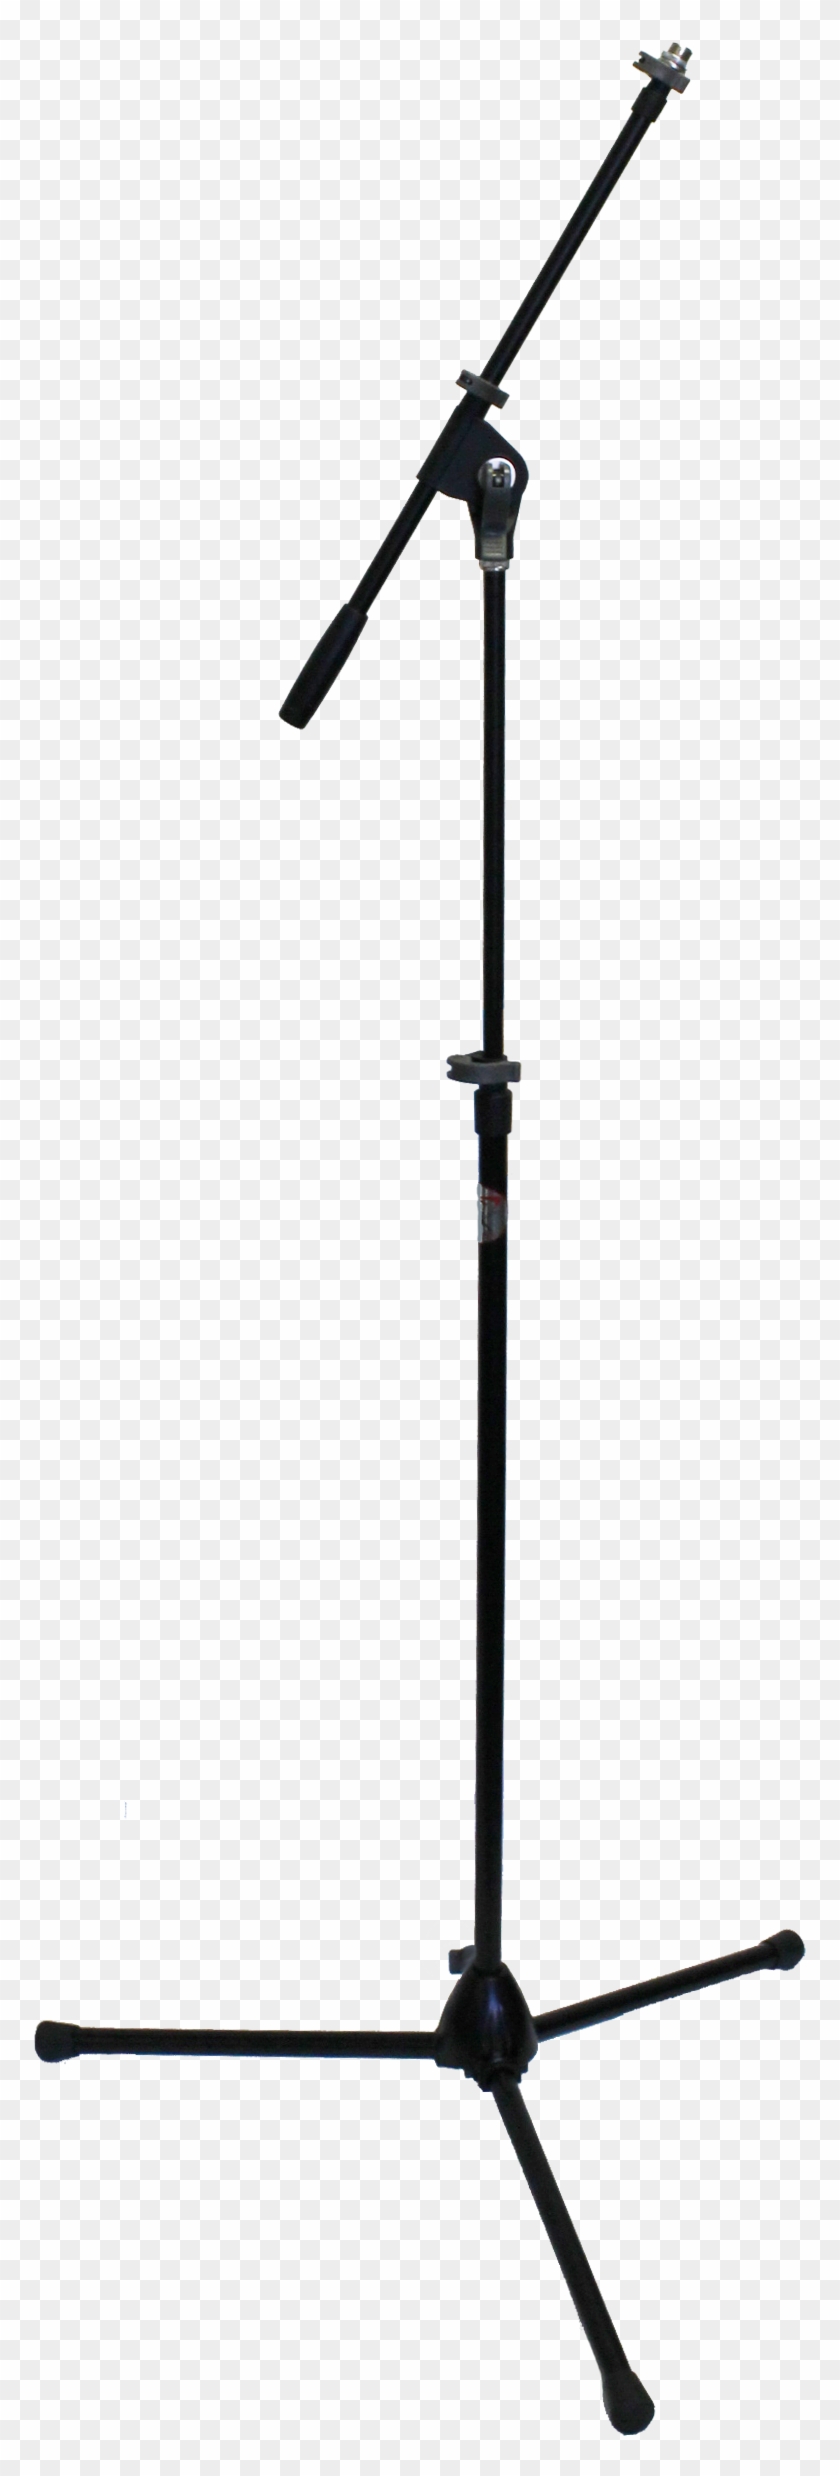 Mic Stand Png Clipart Free Download - Millenium Ms 2005 #1383463